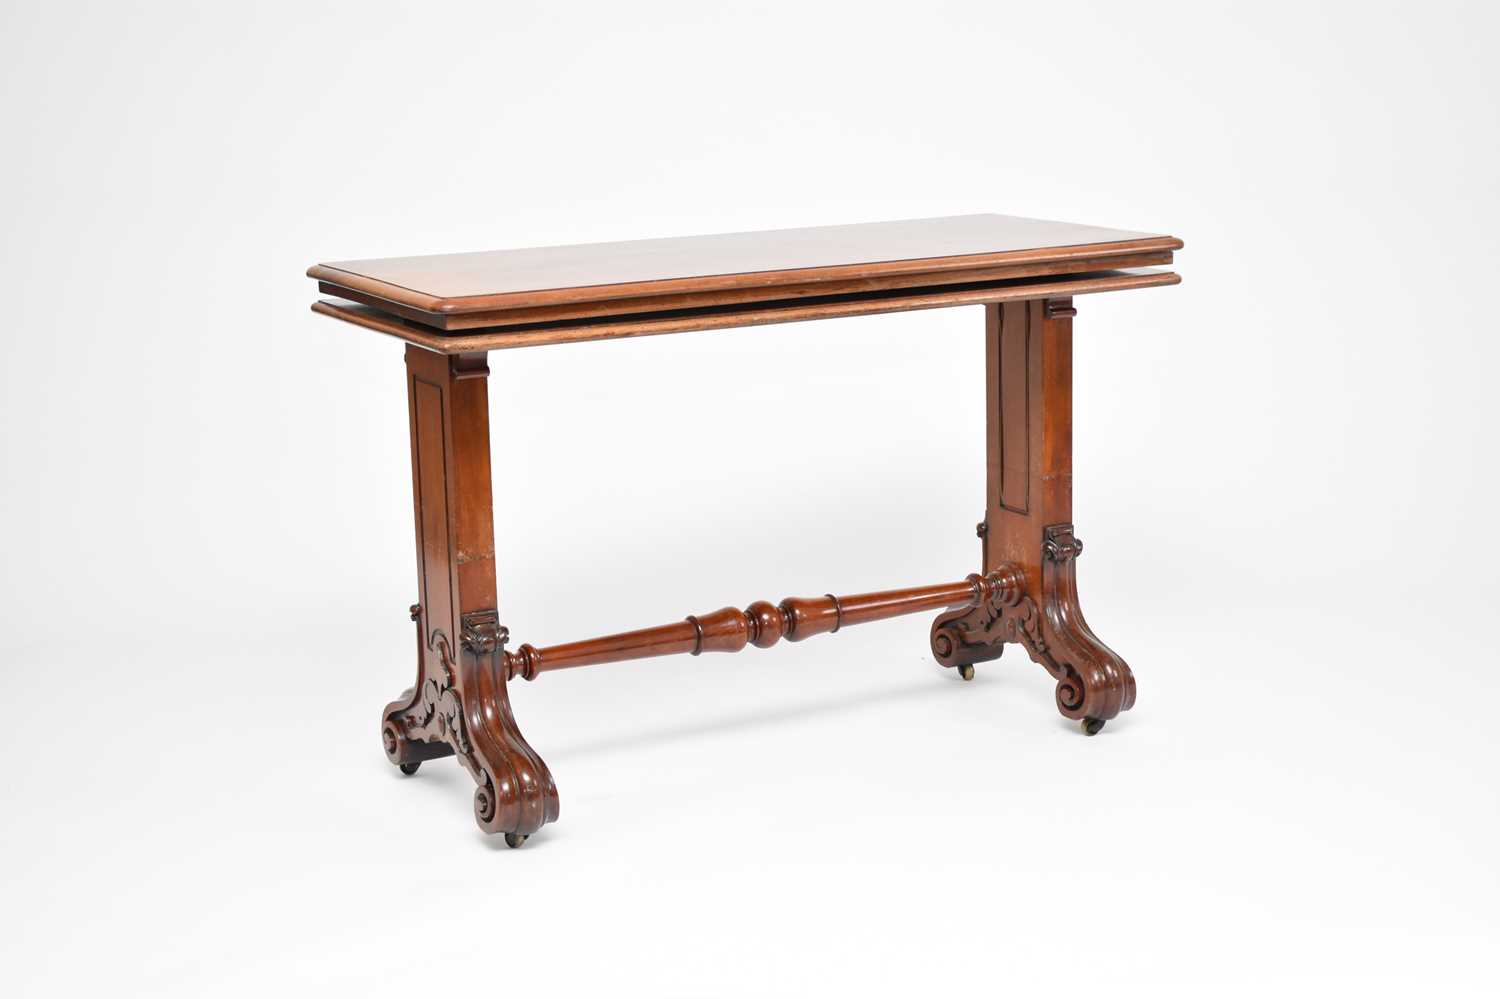 A William IV mahogny metamorphic buffet table - Image 2 of 2